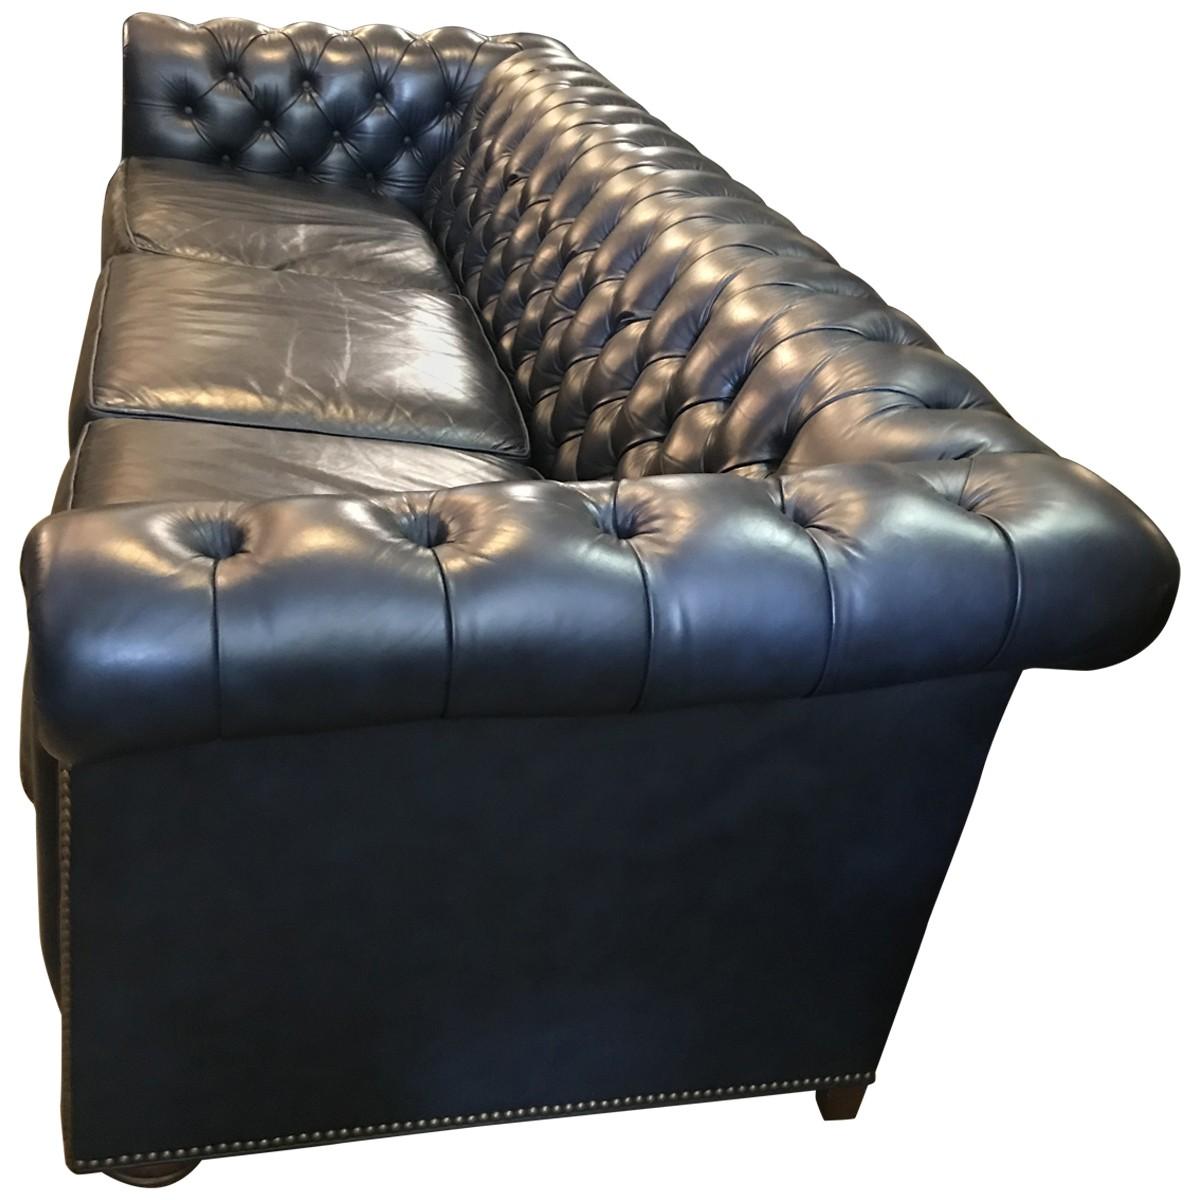 Located in the highlands of Western North Carolina, Leathercraft has manufactured the finest leather seating available for over forty years. Plush and elegant, this commanding three-seat Chesterfield sofa comes clad in smooth navy blue leather